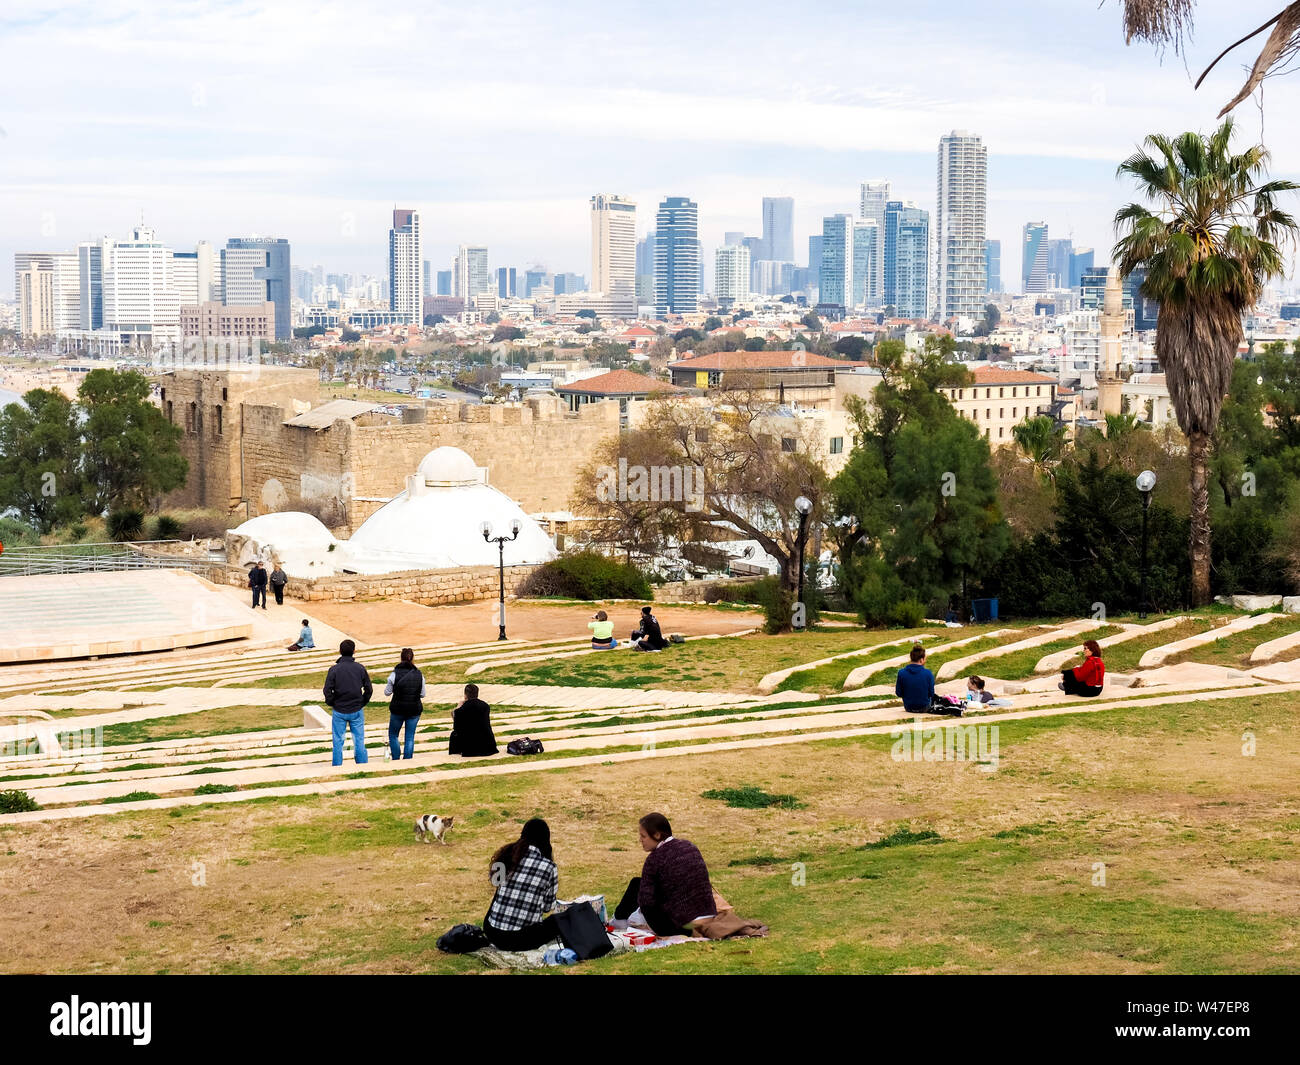 Jaffa, Israel - February 4, 2017: People relaxing on the lawn and admiring the view of the Tel Aviv promenade with modern skyscrapers along the sea. Stock Photo